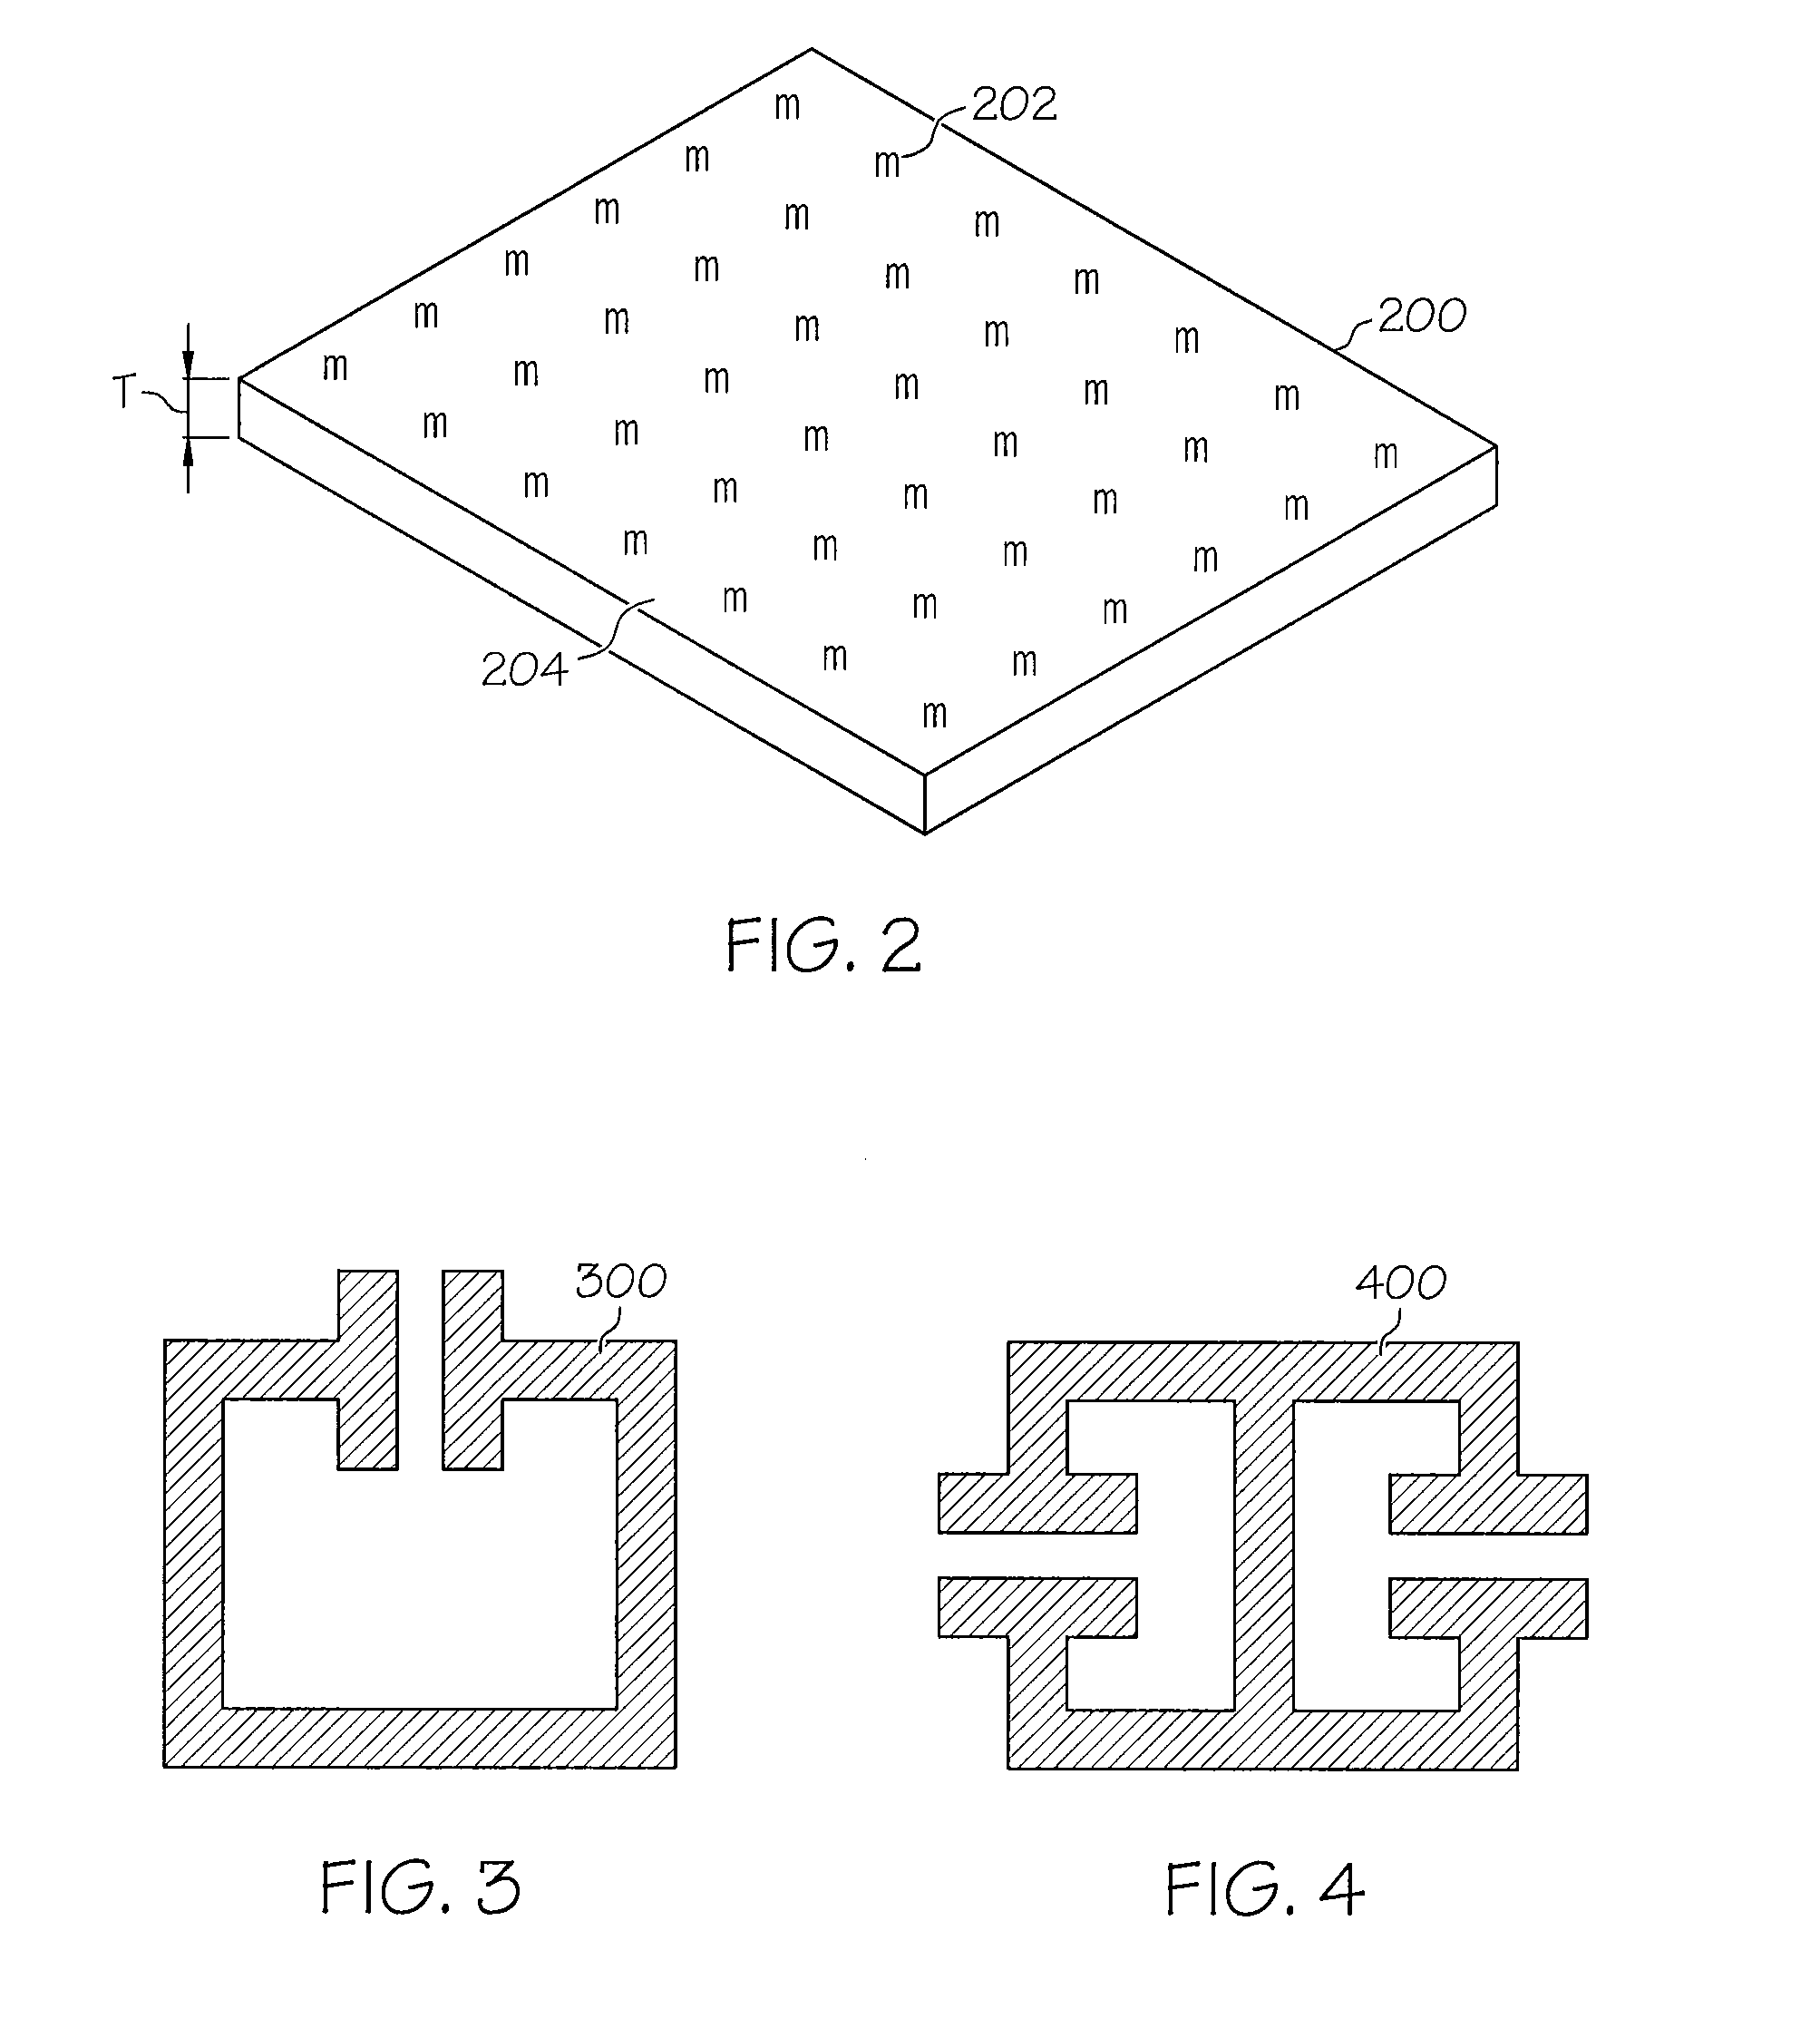 Wide Angle Impedance Matching Using Metamaterials in a Phased Array Antenna System